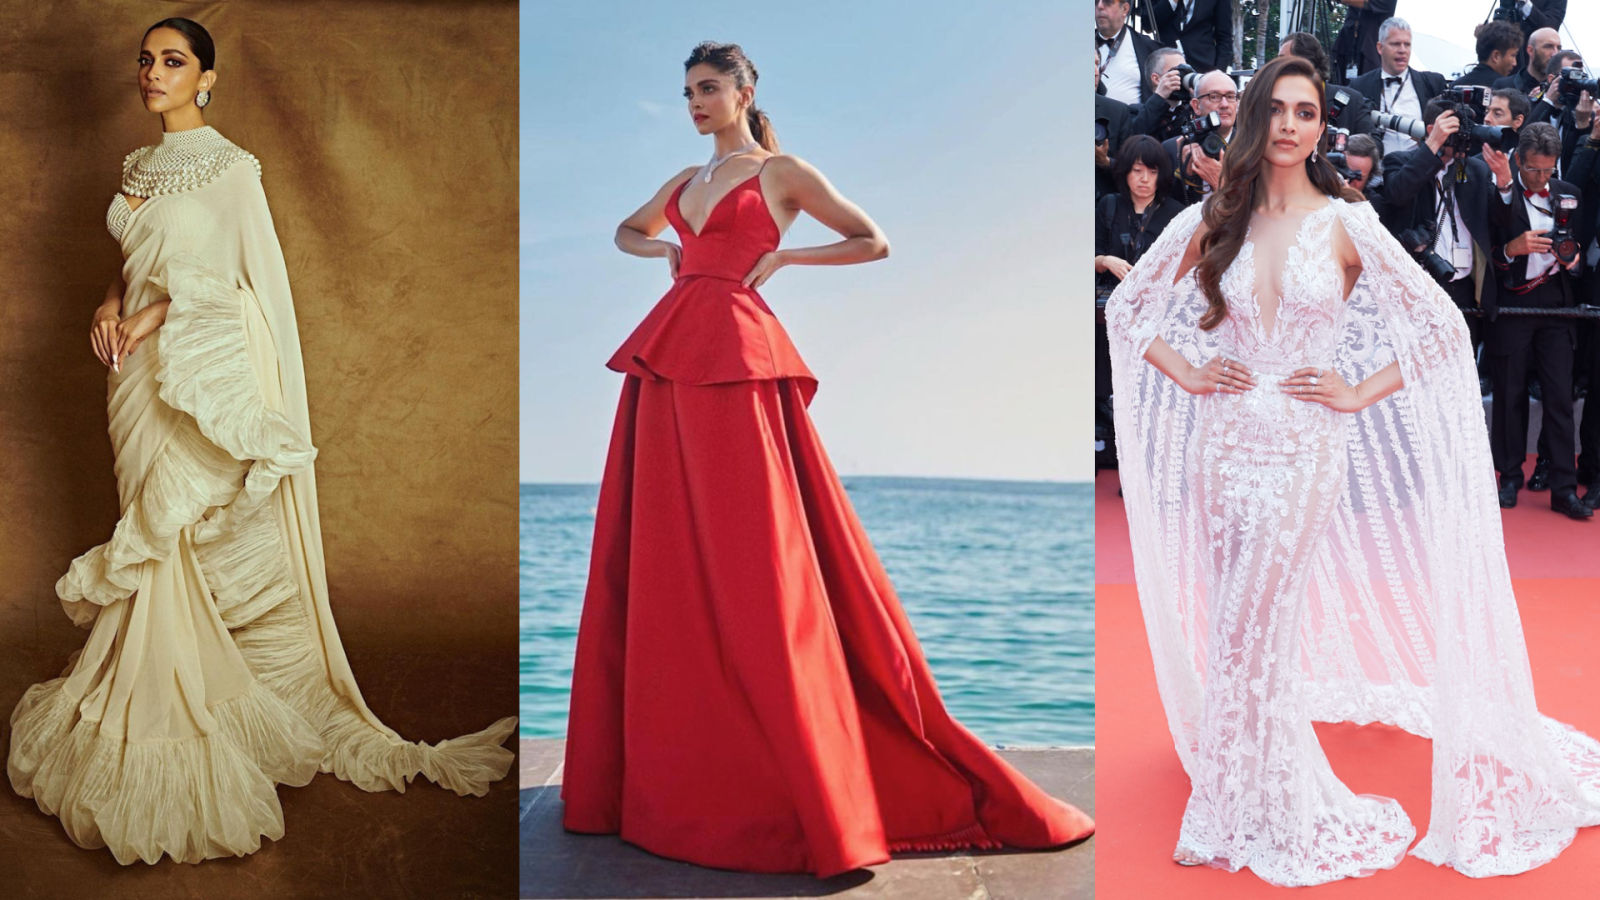 Deepika Padukone served the ultimate front row style at the Louis